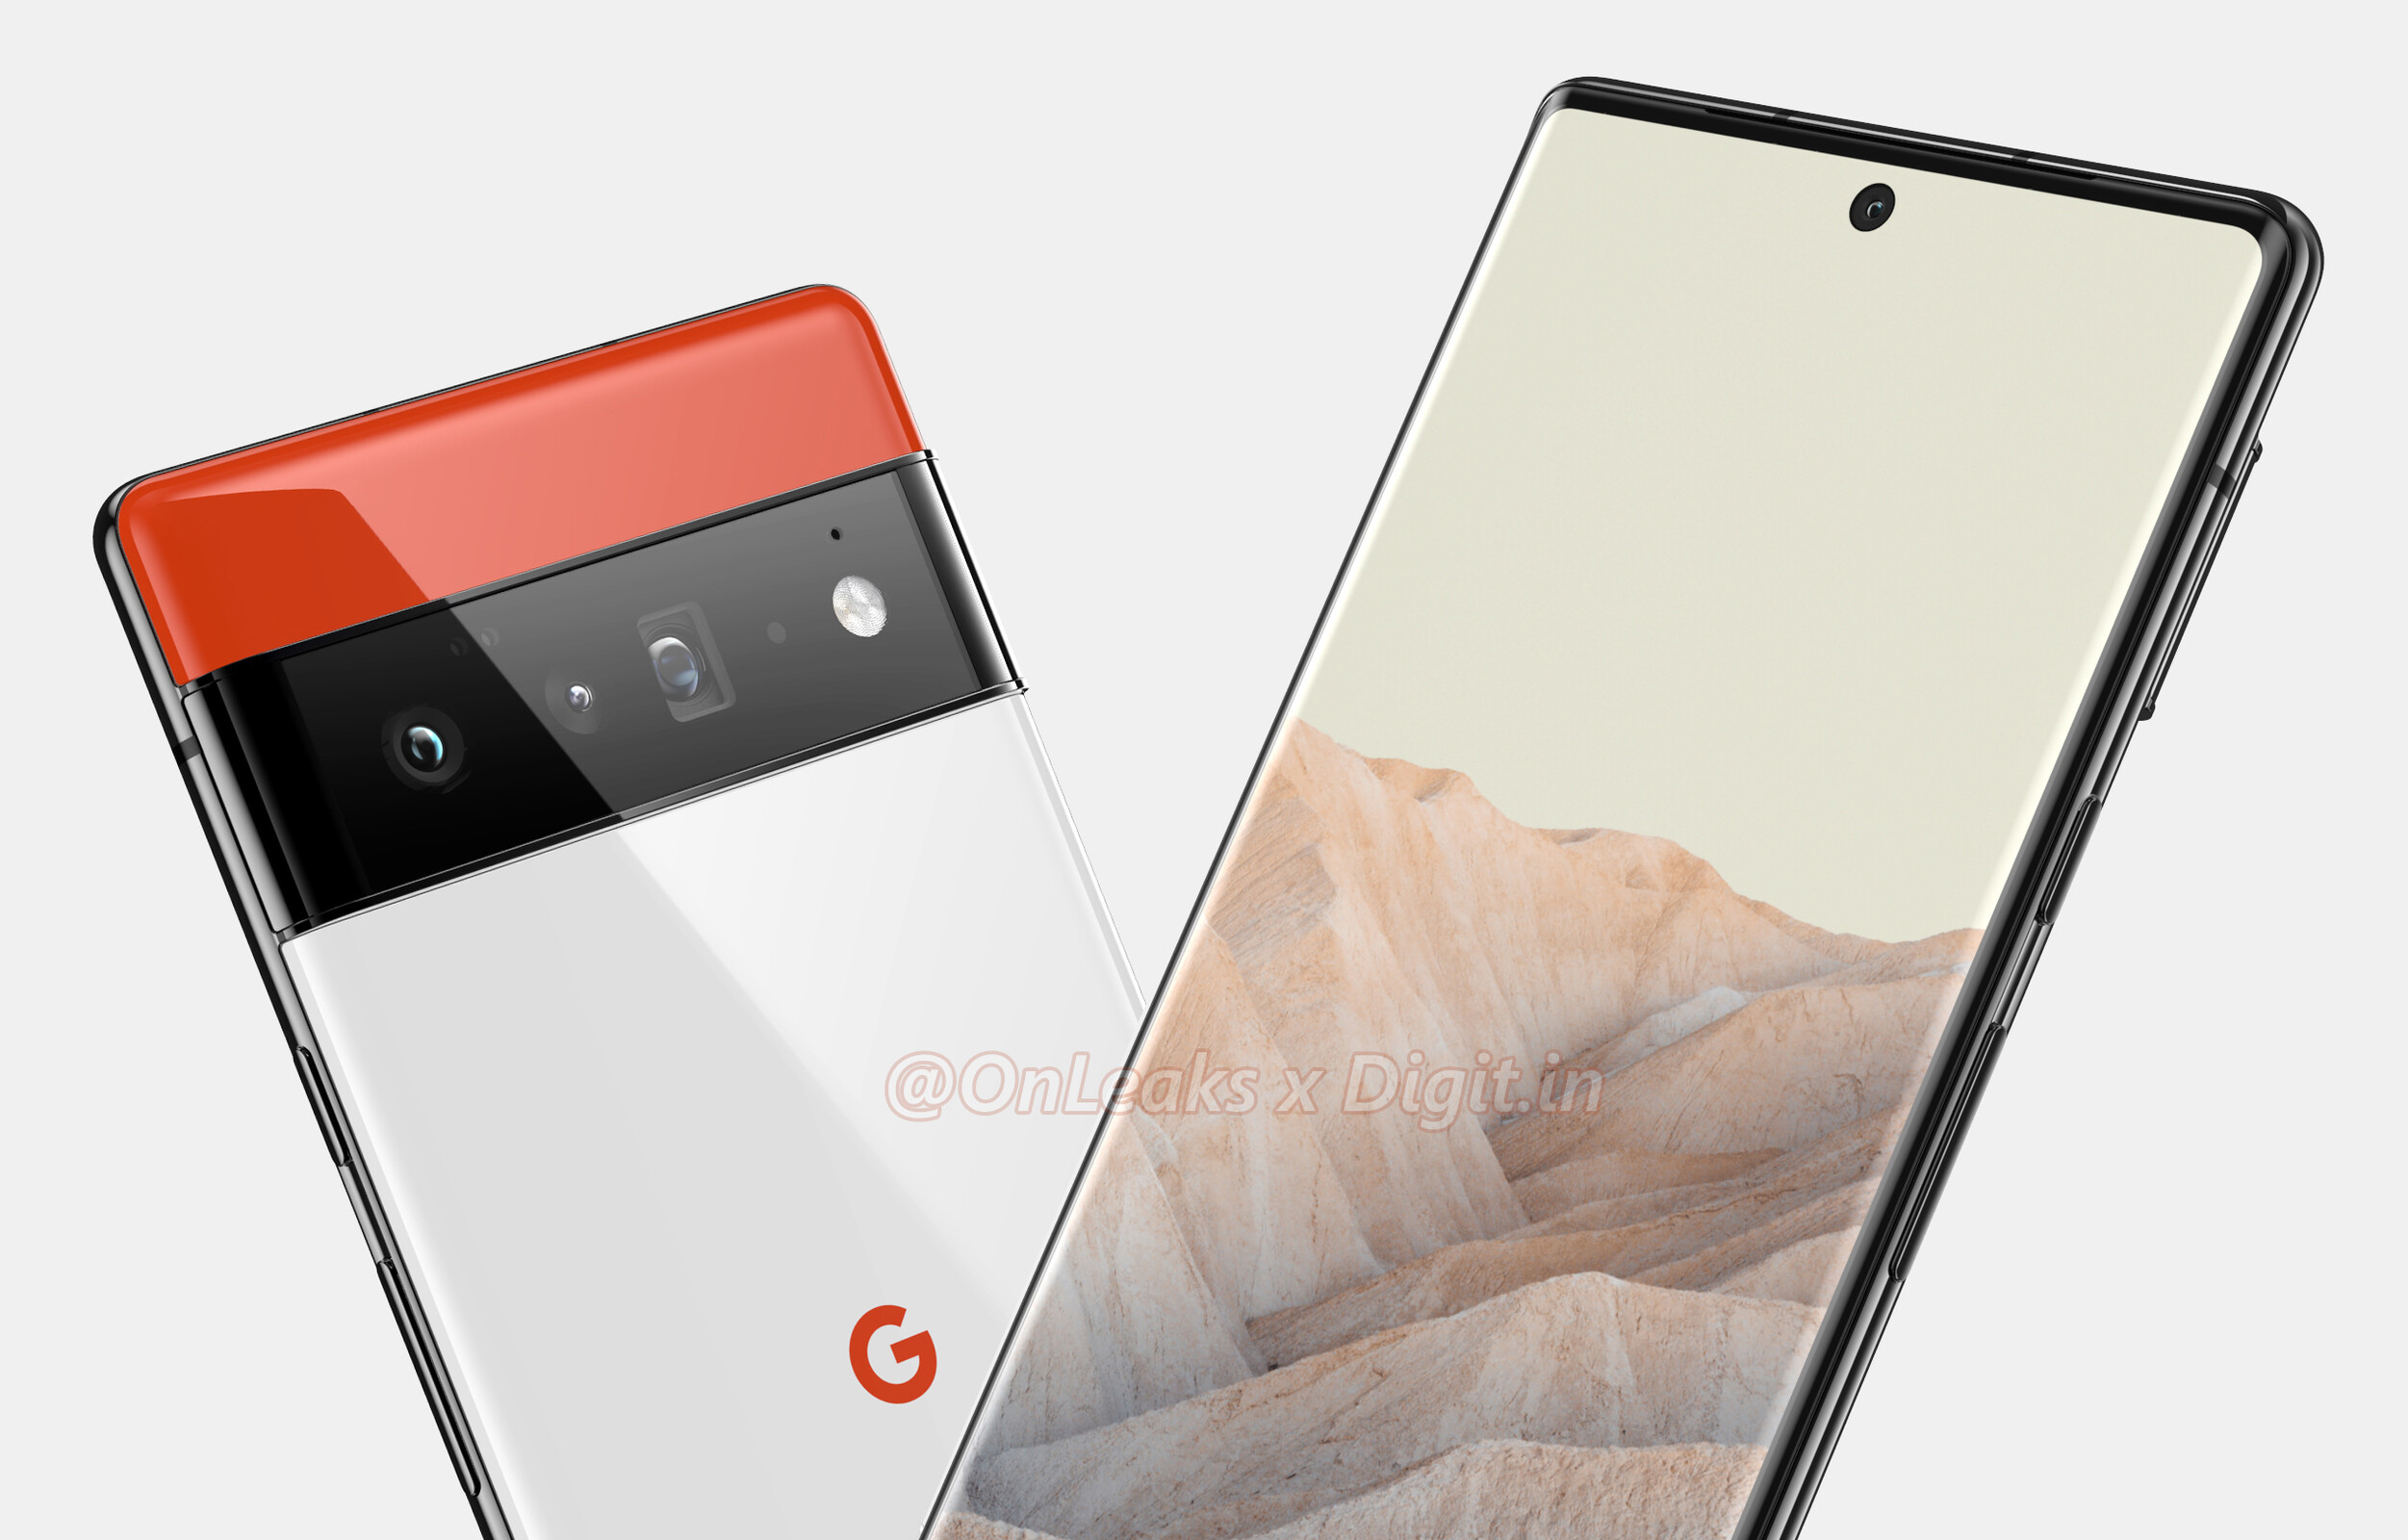 New Google Pixel 6 Pro renders shed light on camera bump, screen size, thickness, and more